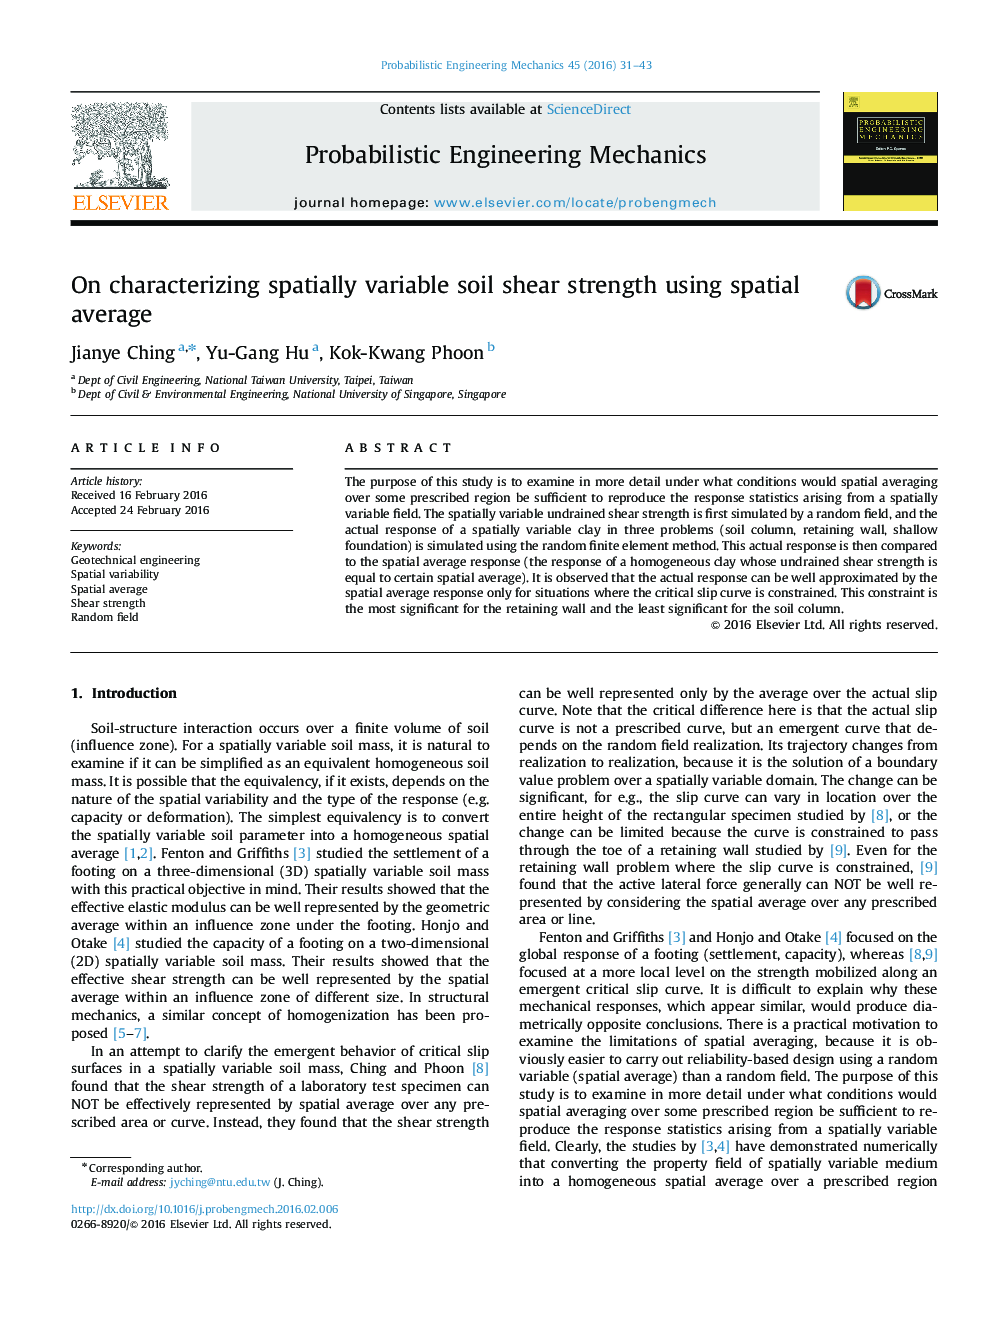 On characterizing spatially variable soil shear strength using spatial average